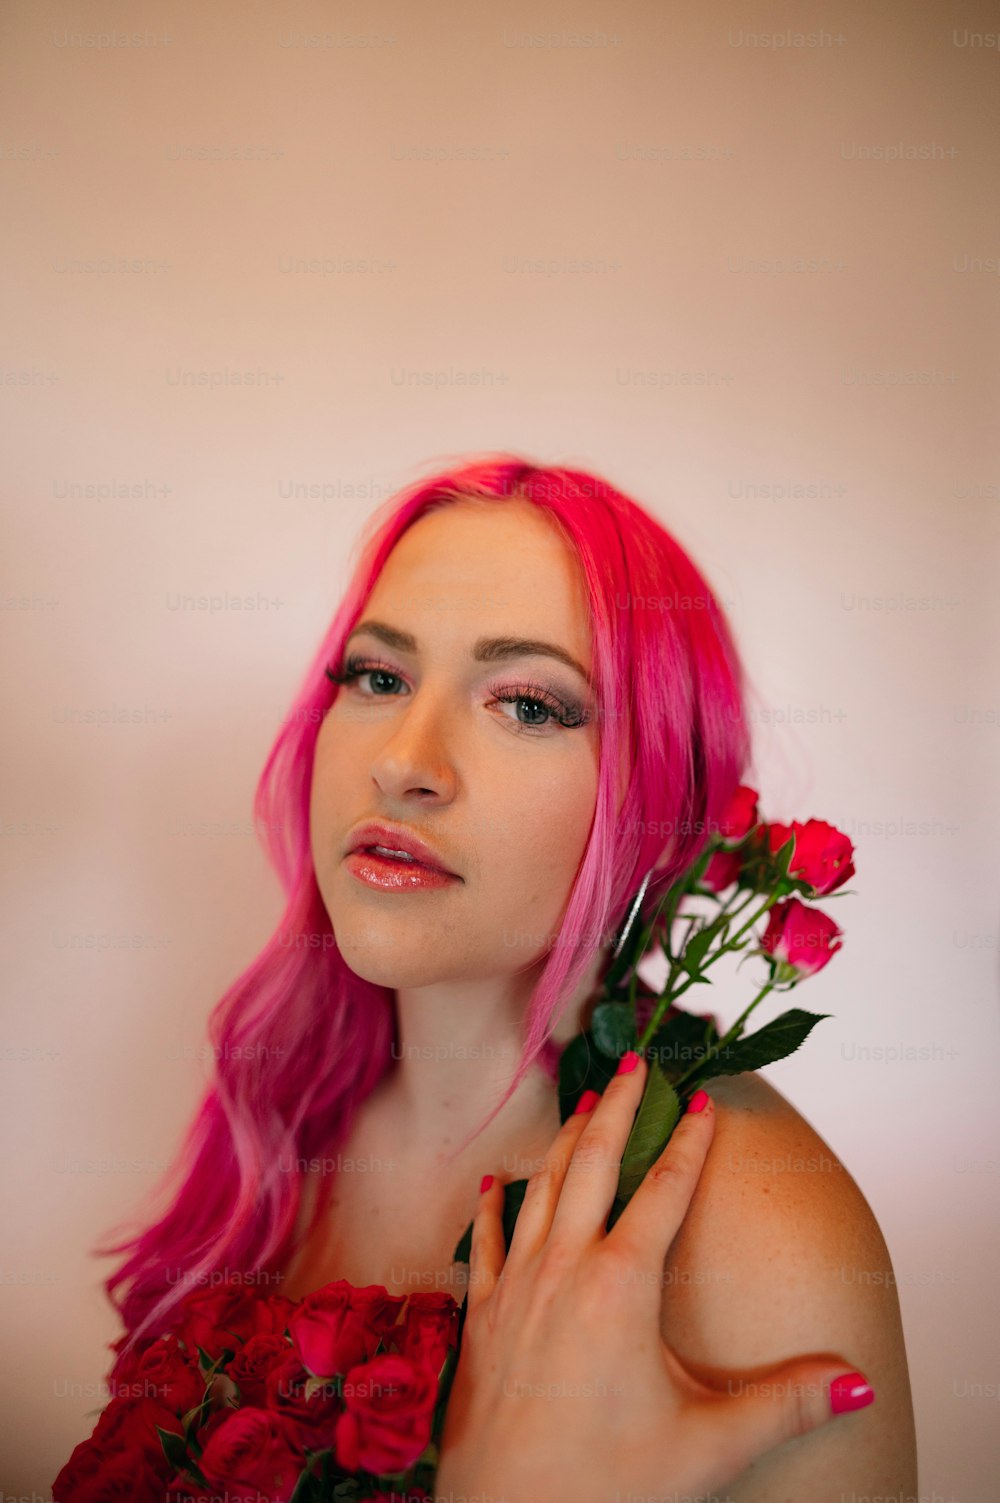 a woman with pink hair holding flowers